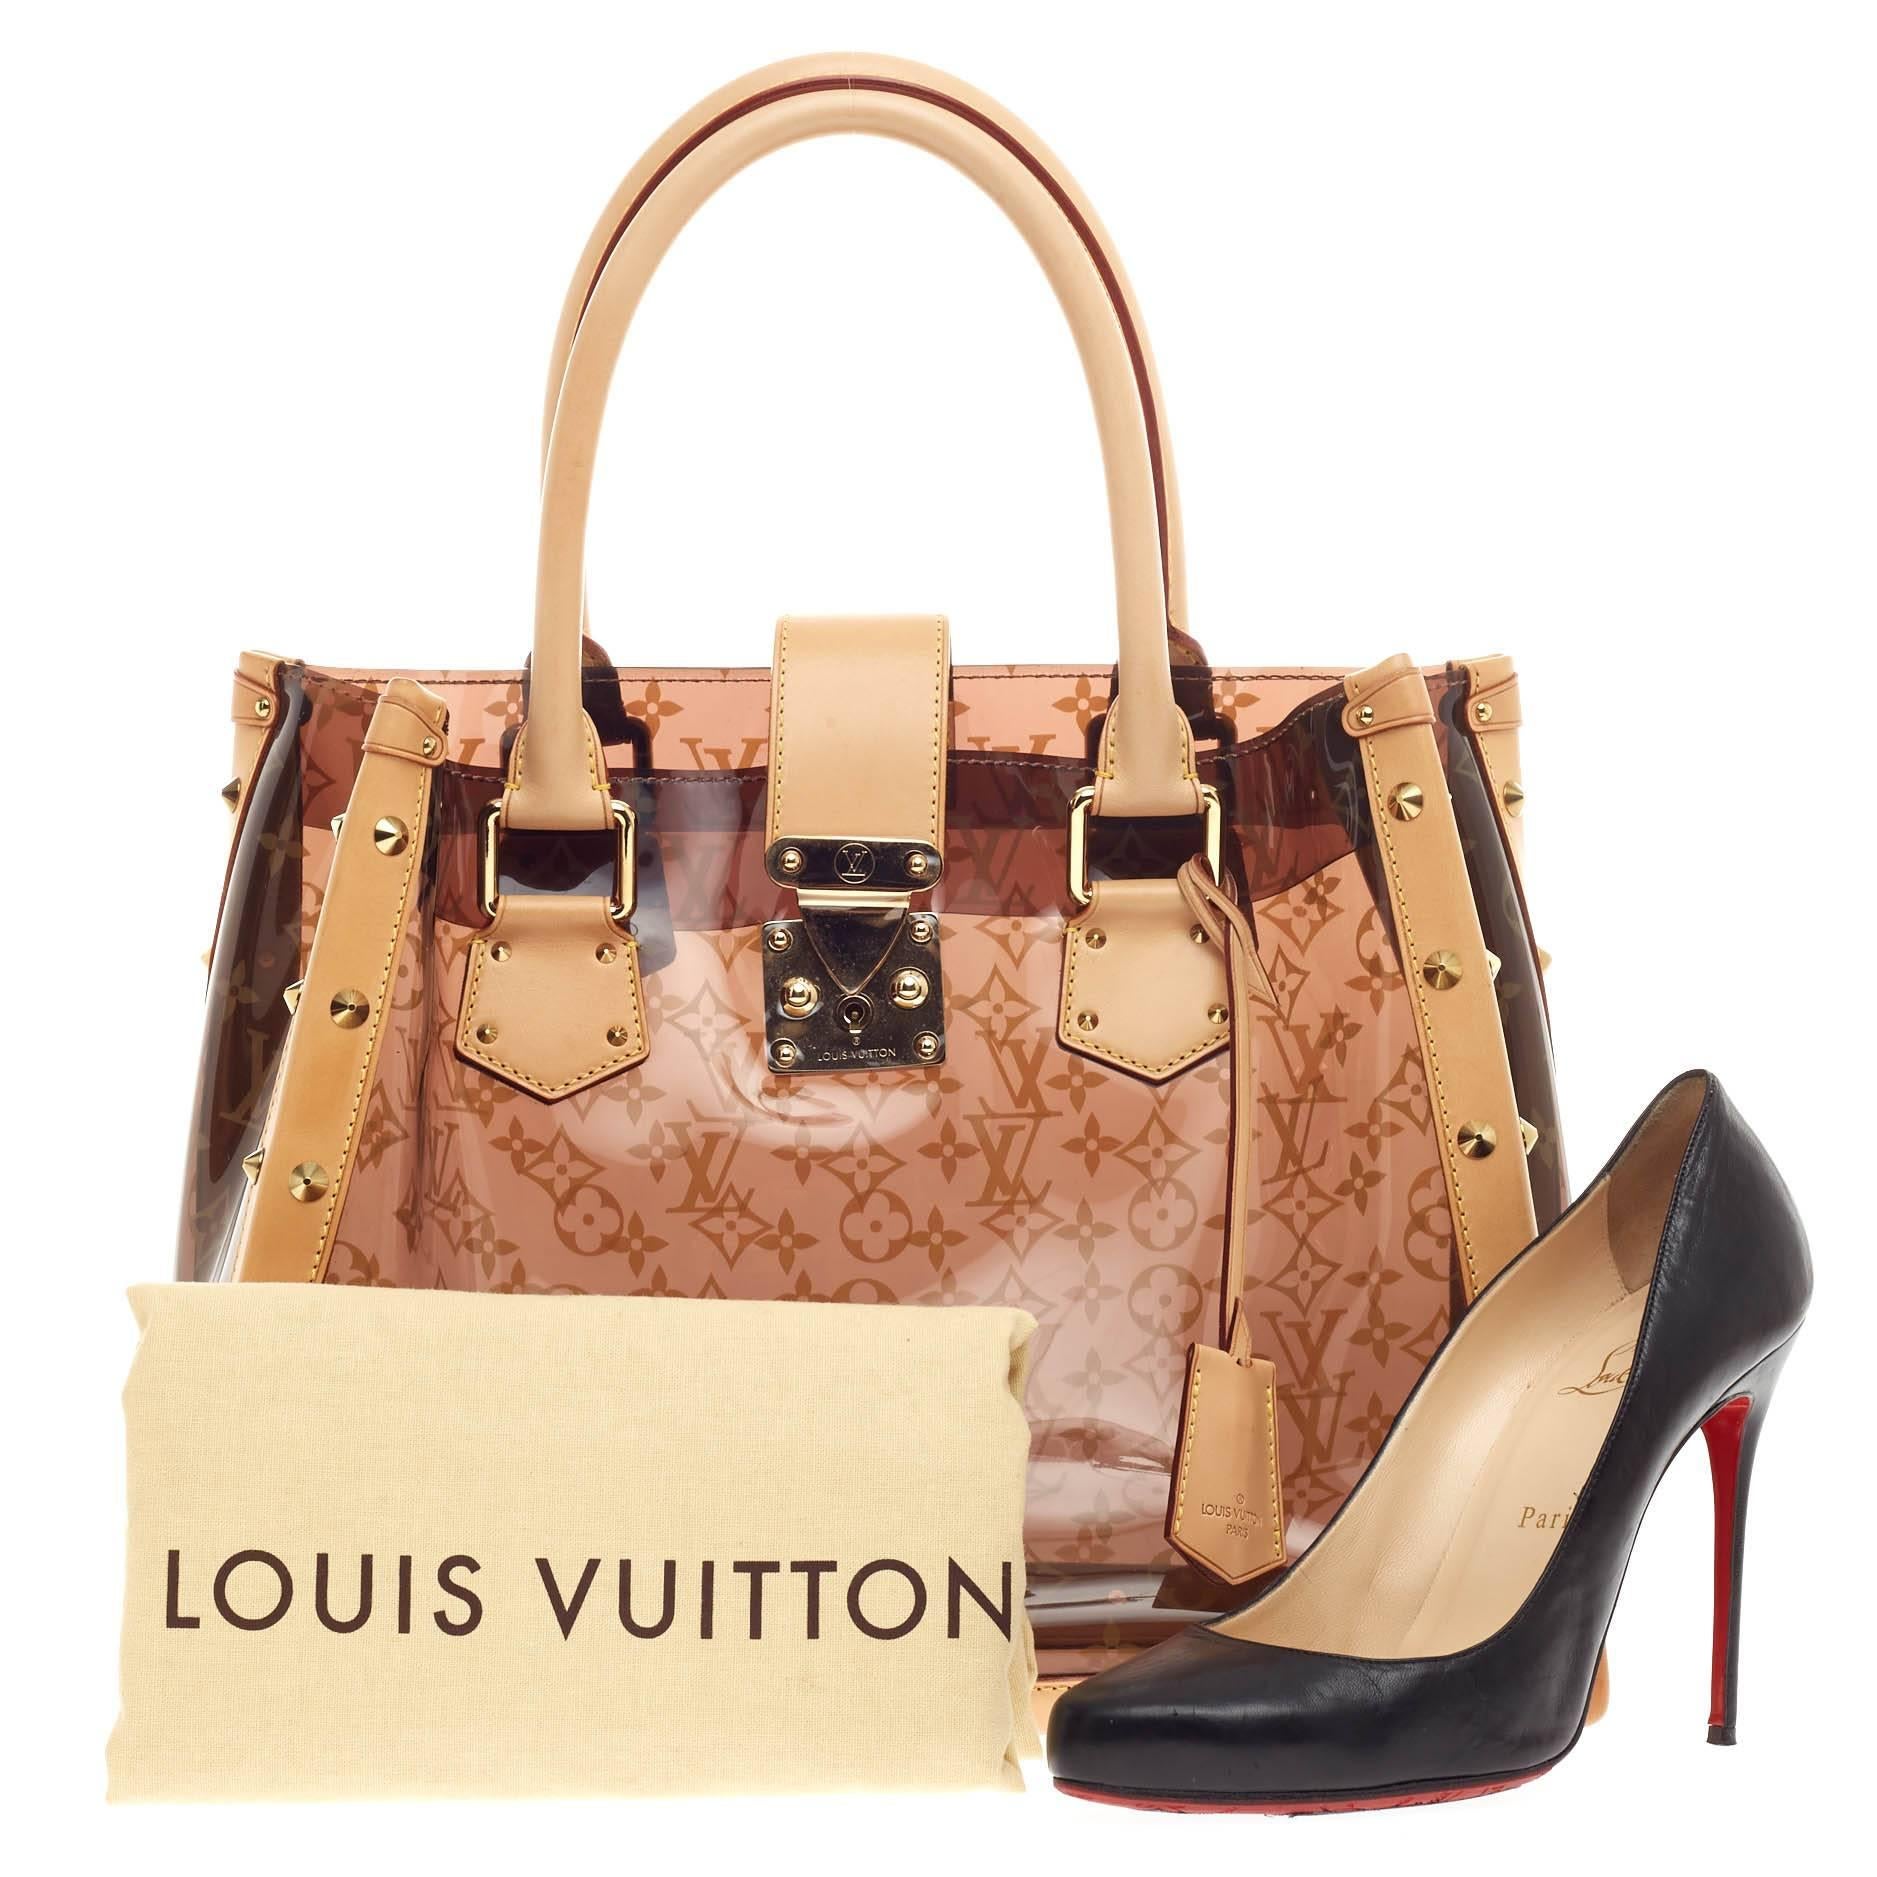 This authentic Louis Vuitton Ambre Neo Cabas Monogram Vinyl showcases a playful design perfect for casual days. Constructed from monogram ambre vinyl and accented with cowhide leather trims, this stylish tote features dual vachetta leather handles,